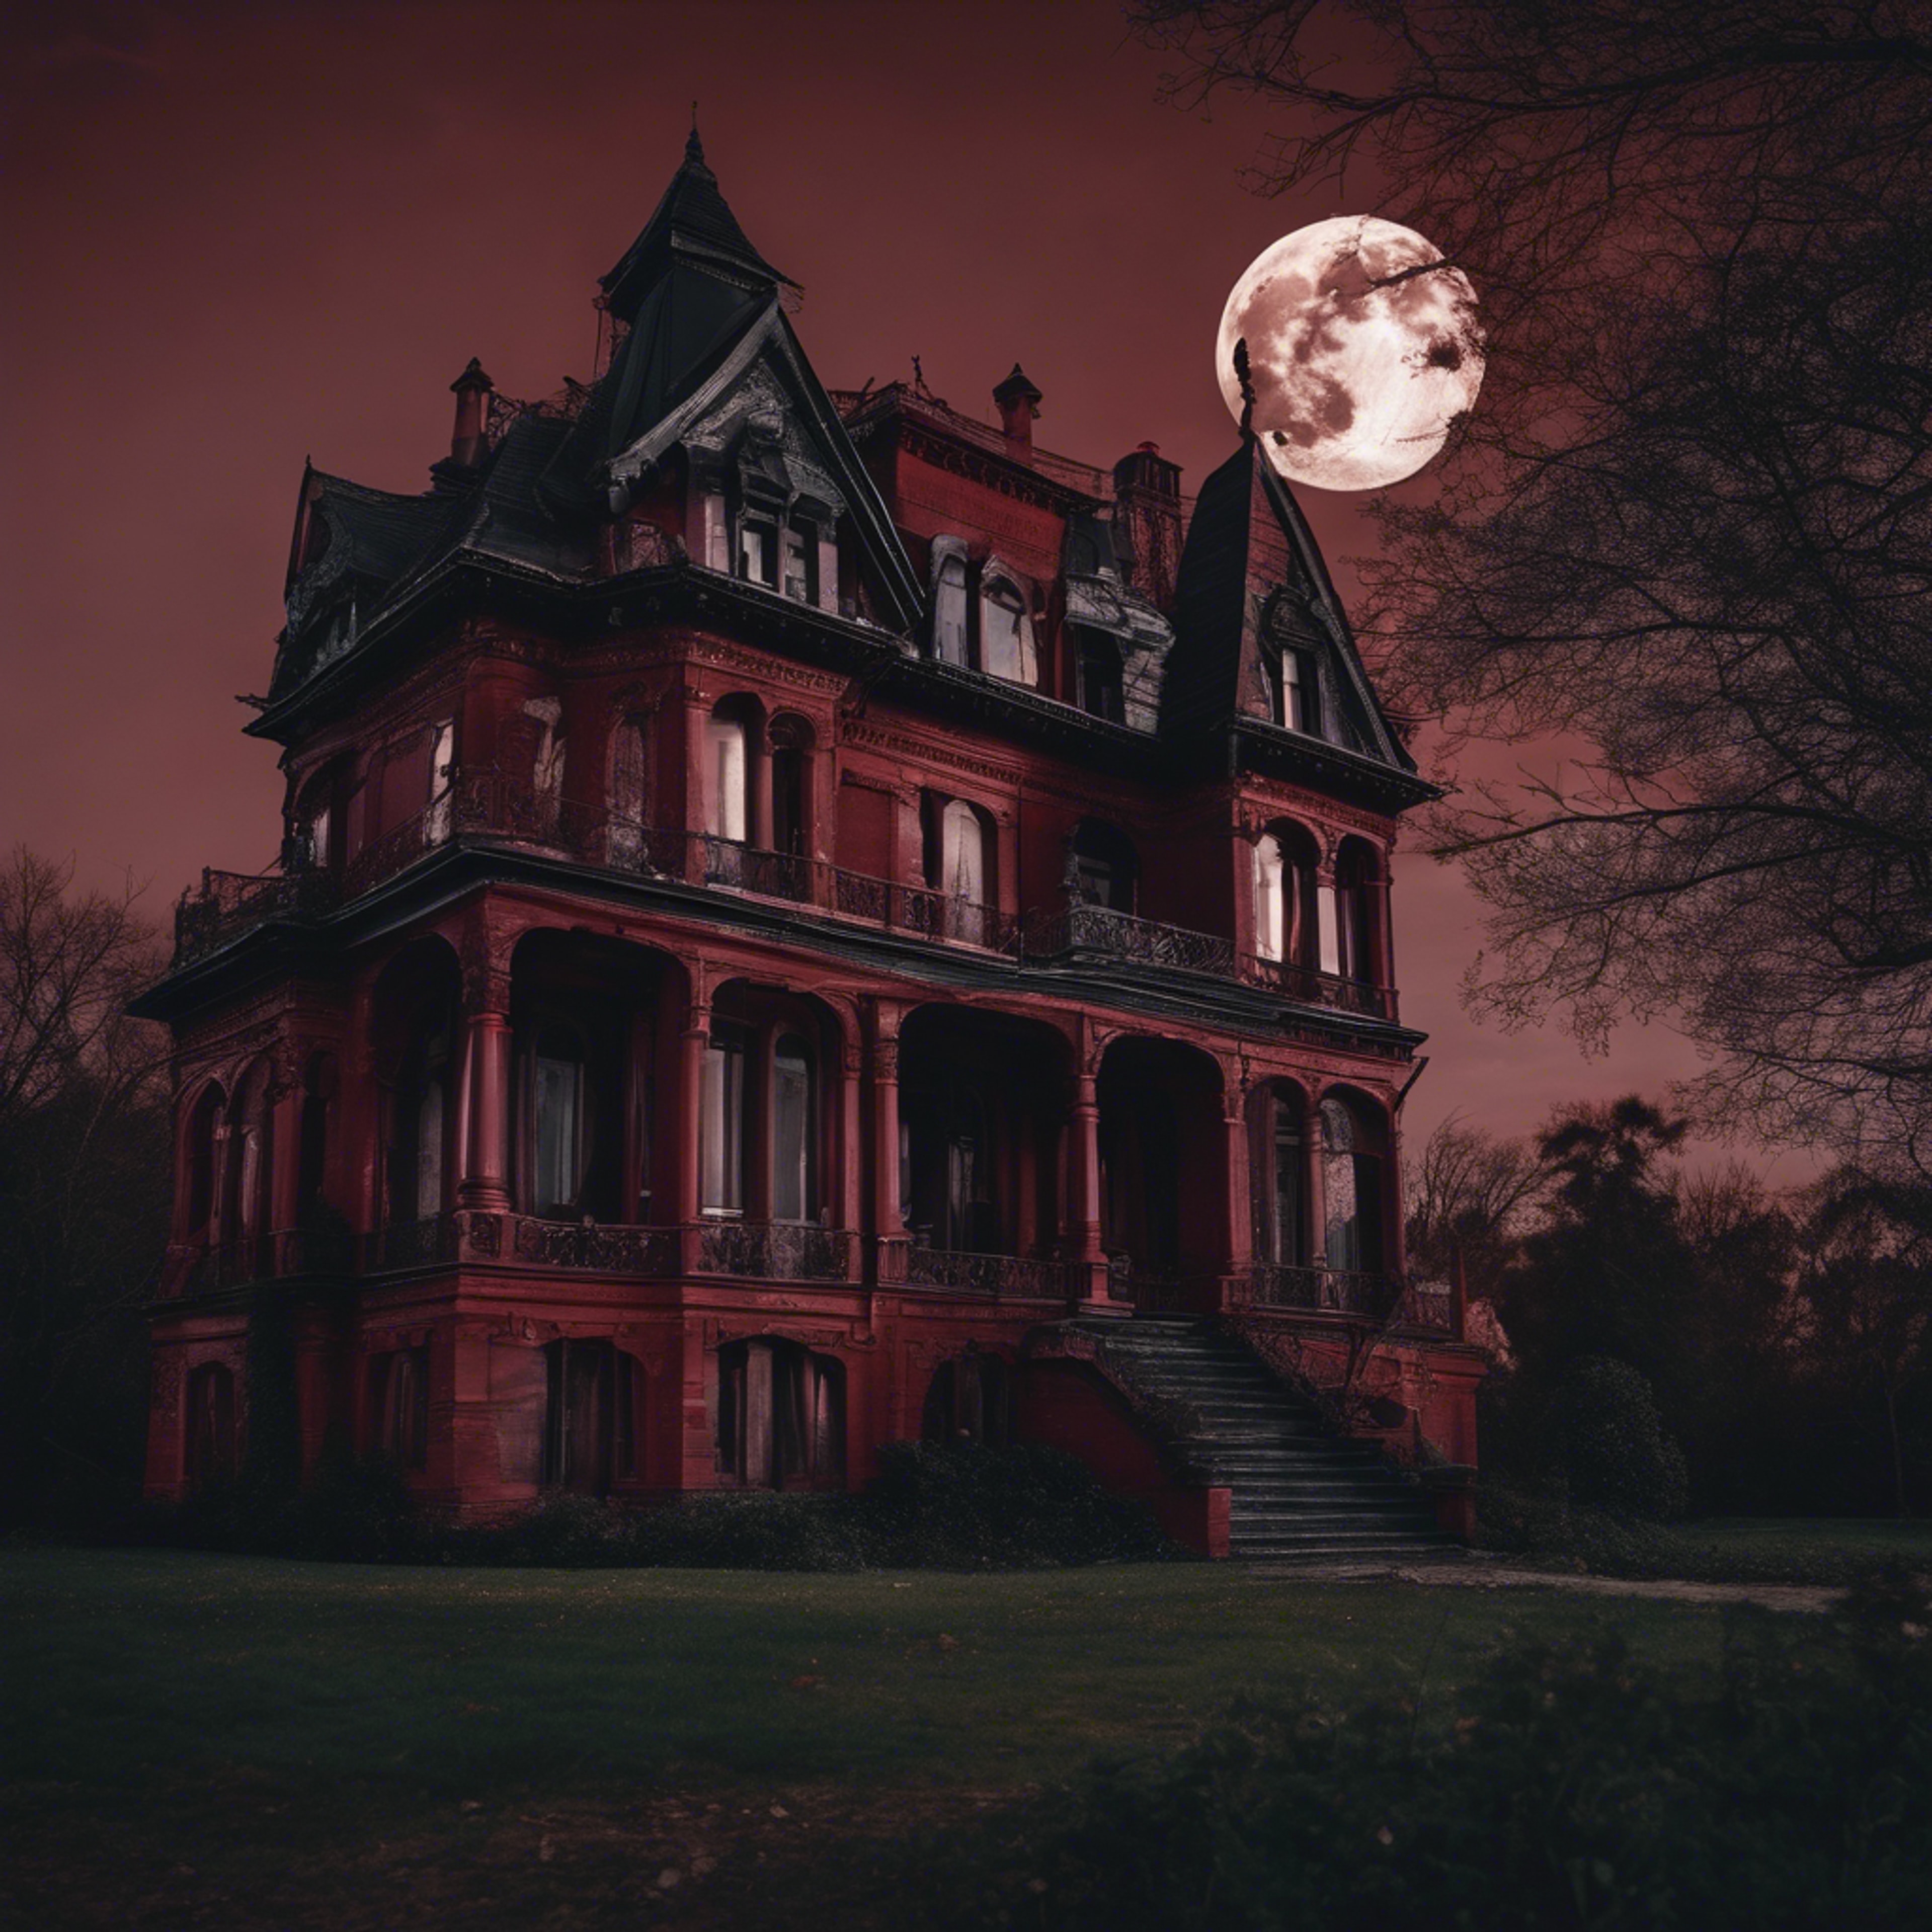 Moody view of an old Victorian mansion in dark red hues under a nearly full moon. ورق الجدران[8b4d1d2d66a3409f8c39]